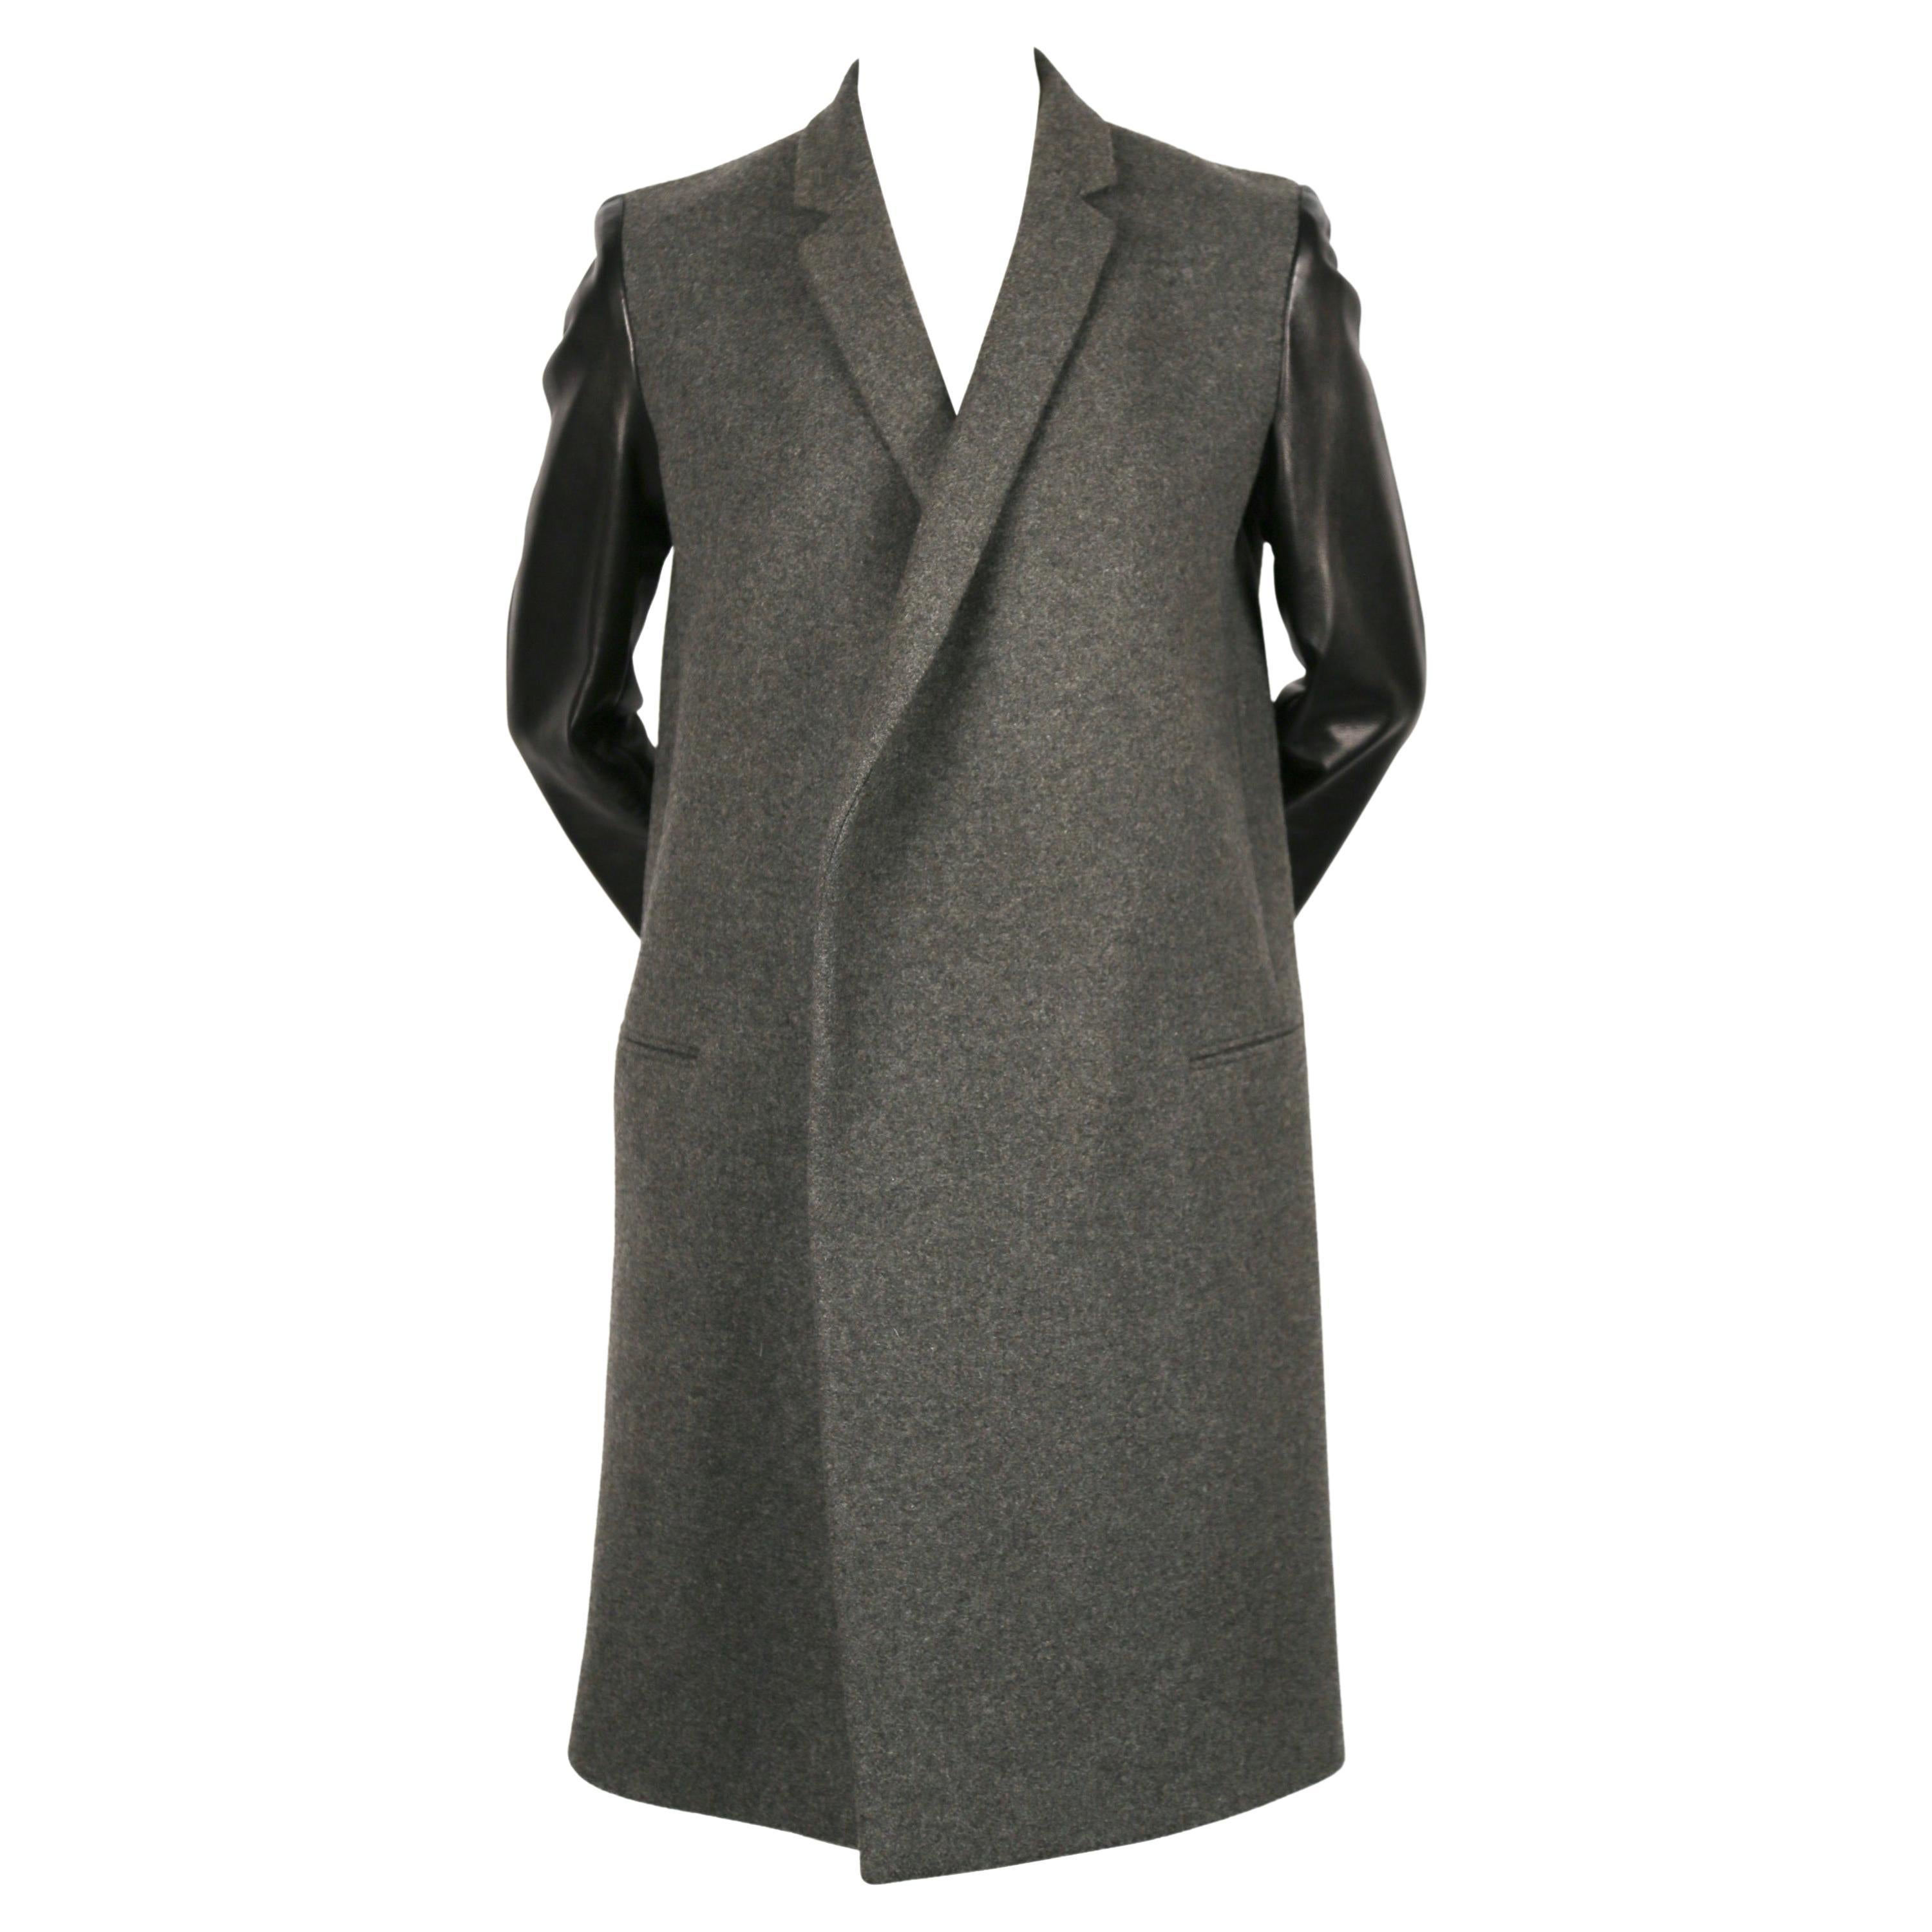 CELINE by PHOEBE PHILO charcoal grey black leather sleeve crombie coat For Sale